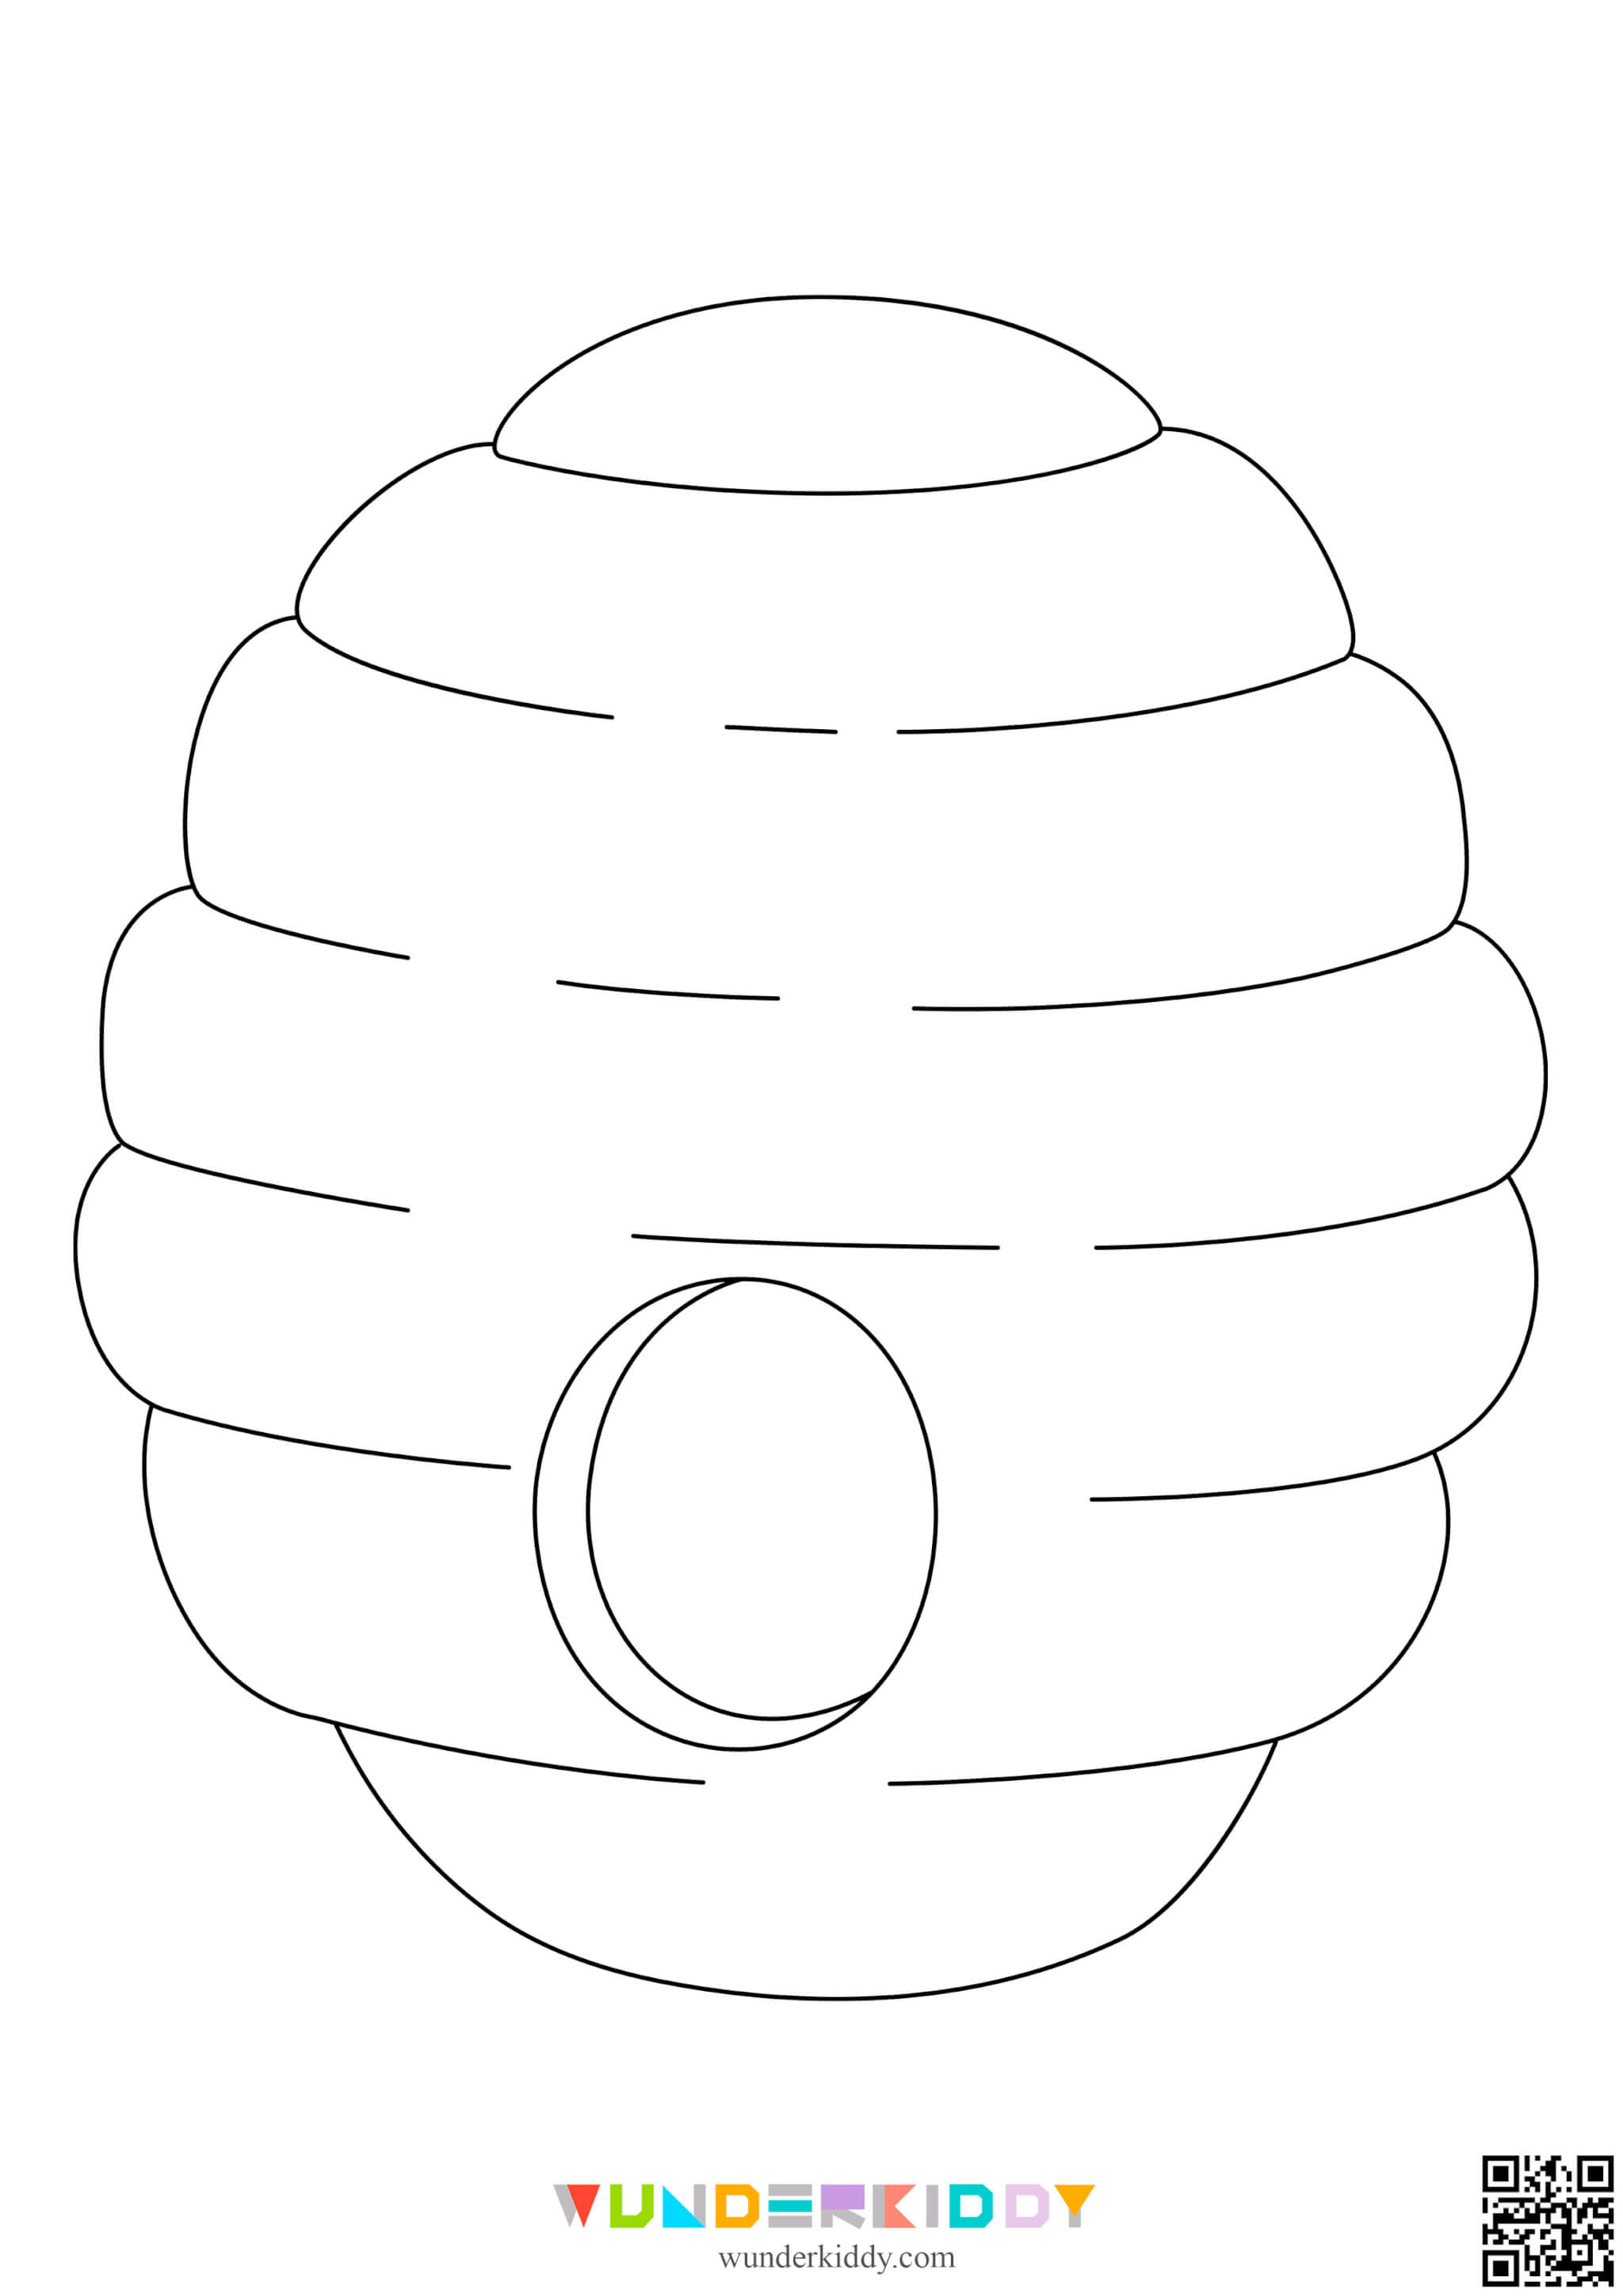 Beehive Template for Workshops - Image 9